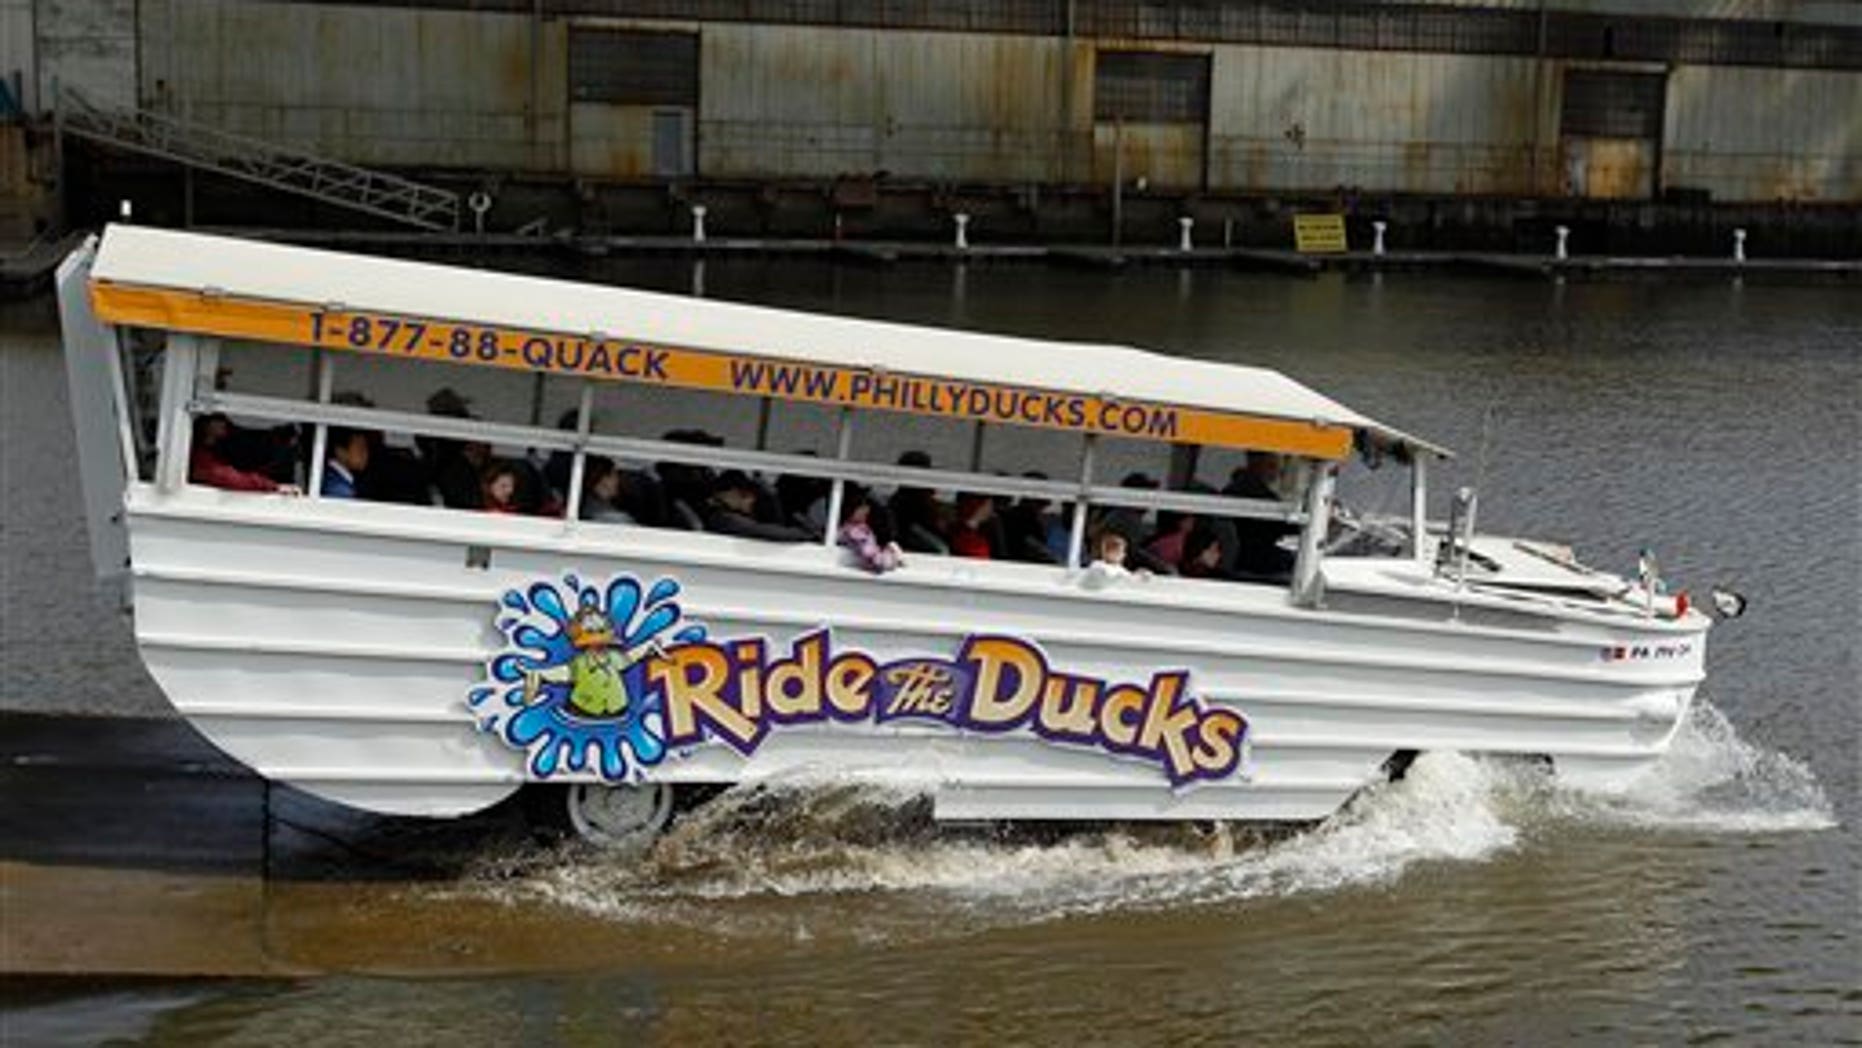 Philly duck boat tours resume after fatal crash | Fox News